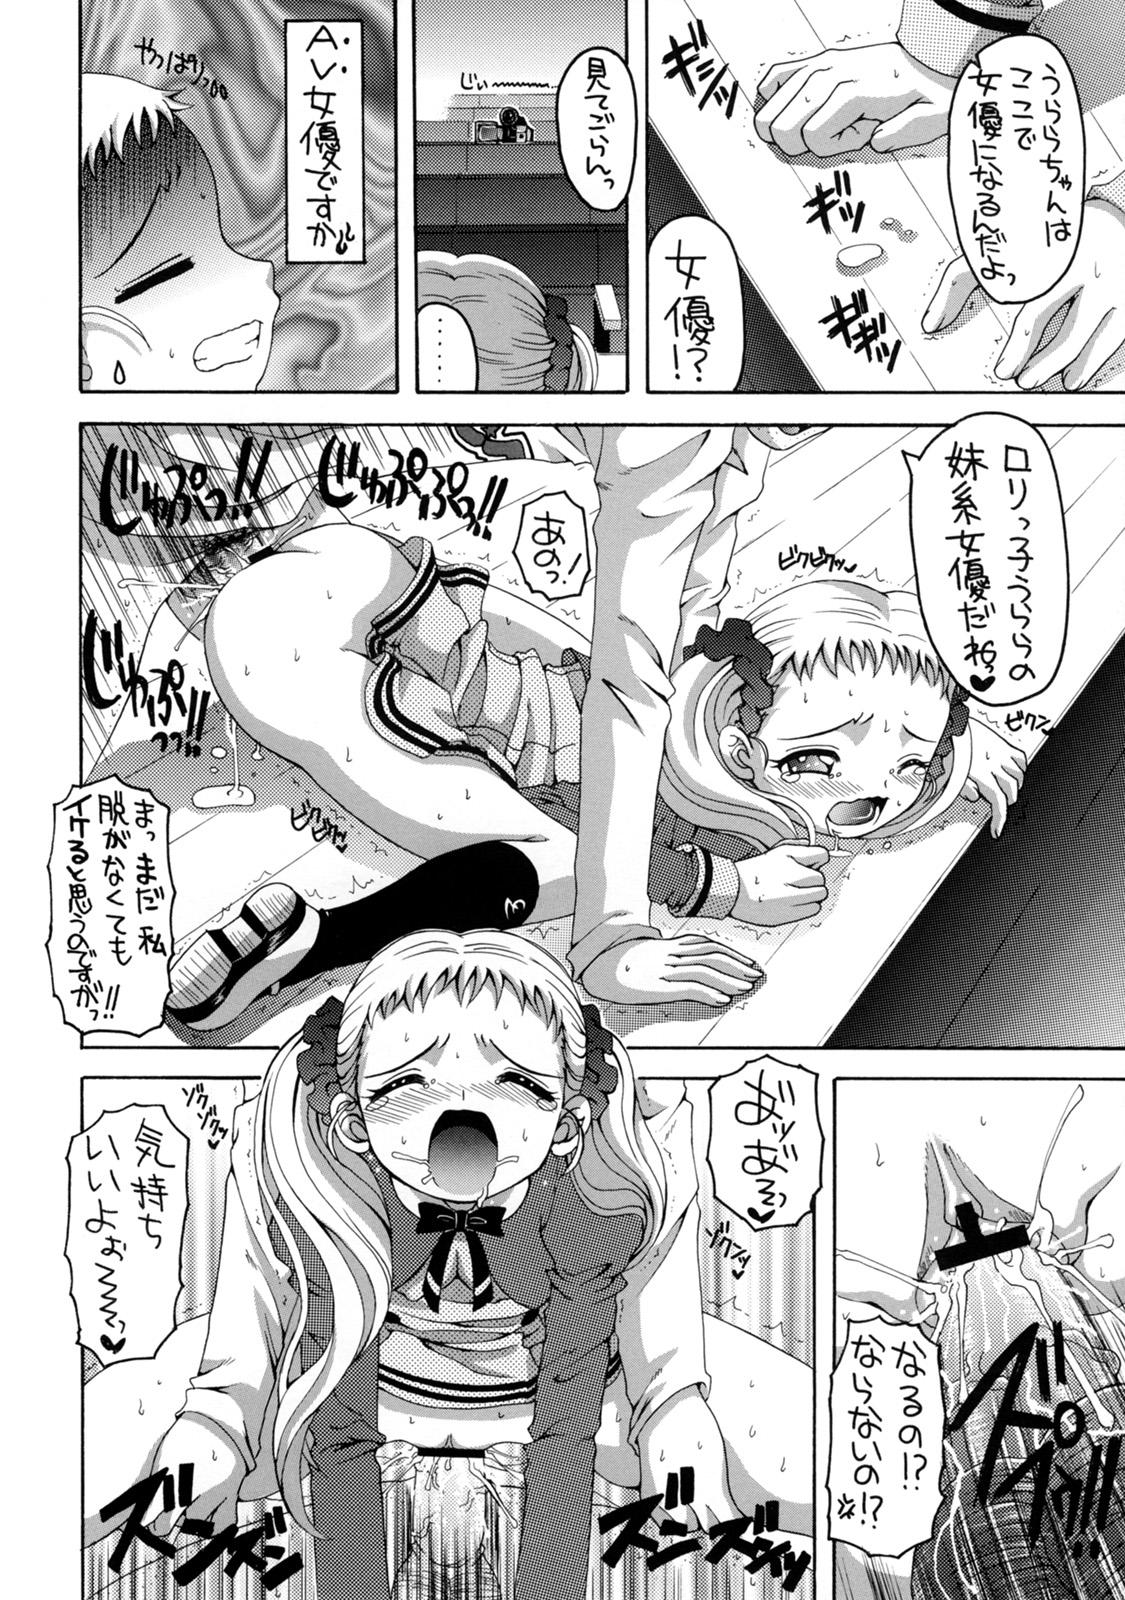 Chaturbate Yes! Five 3 - Pretty cure Yes precure 5 Master - Page 11